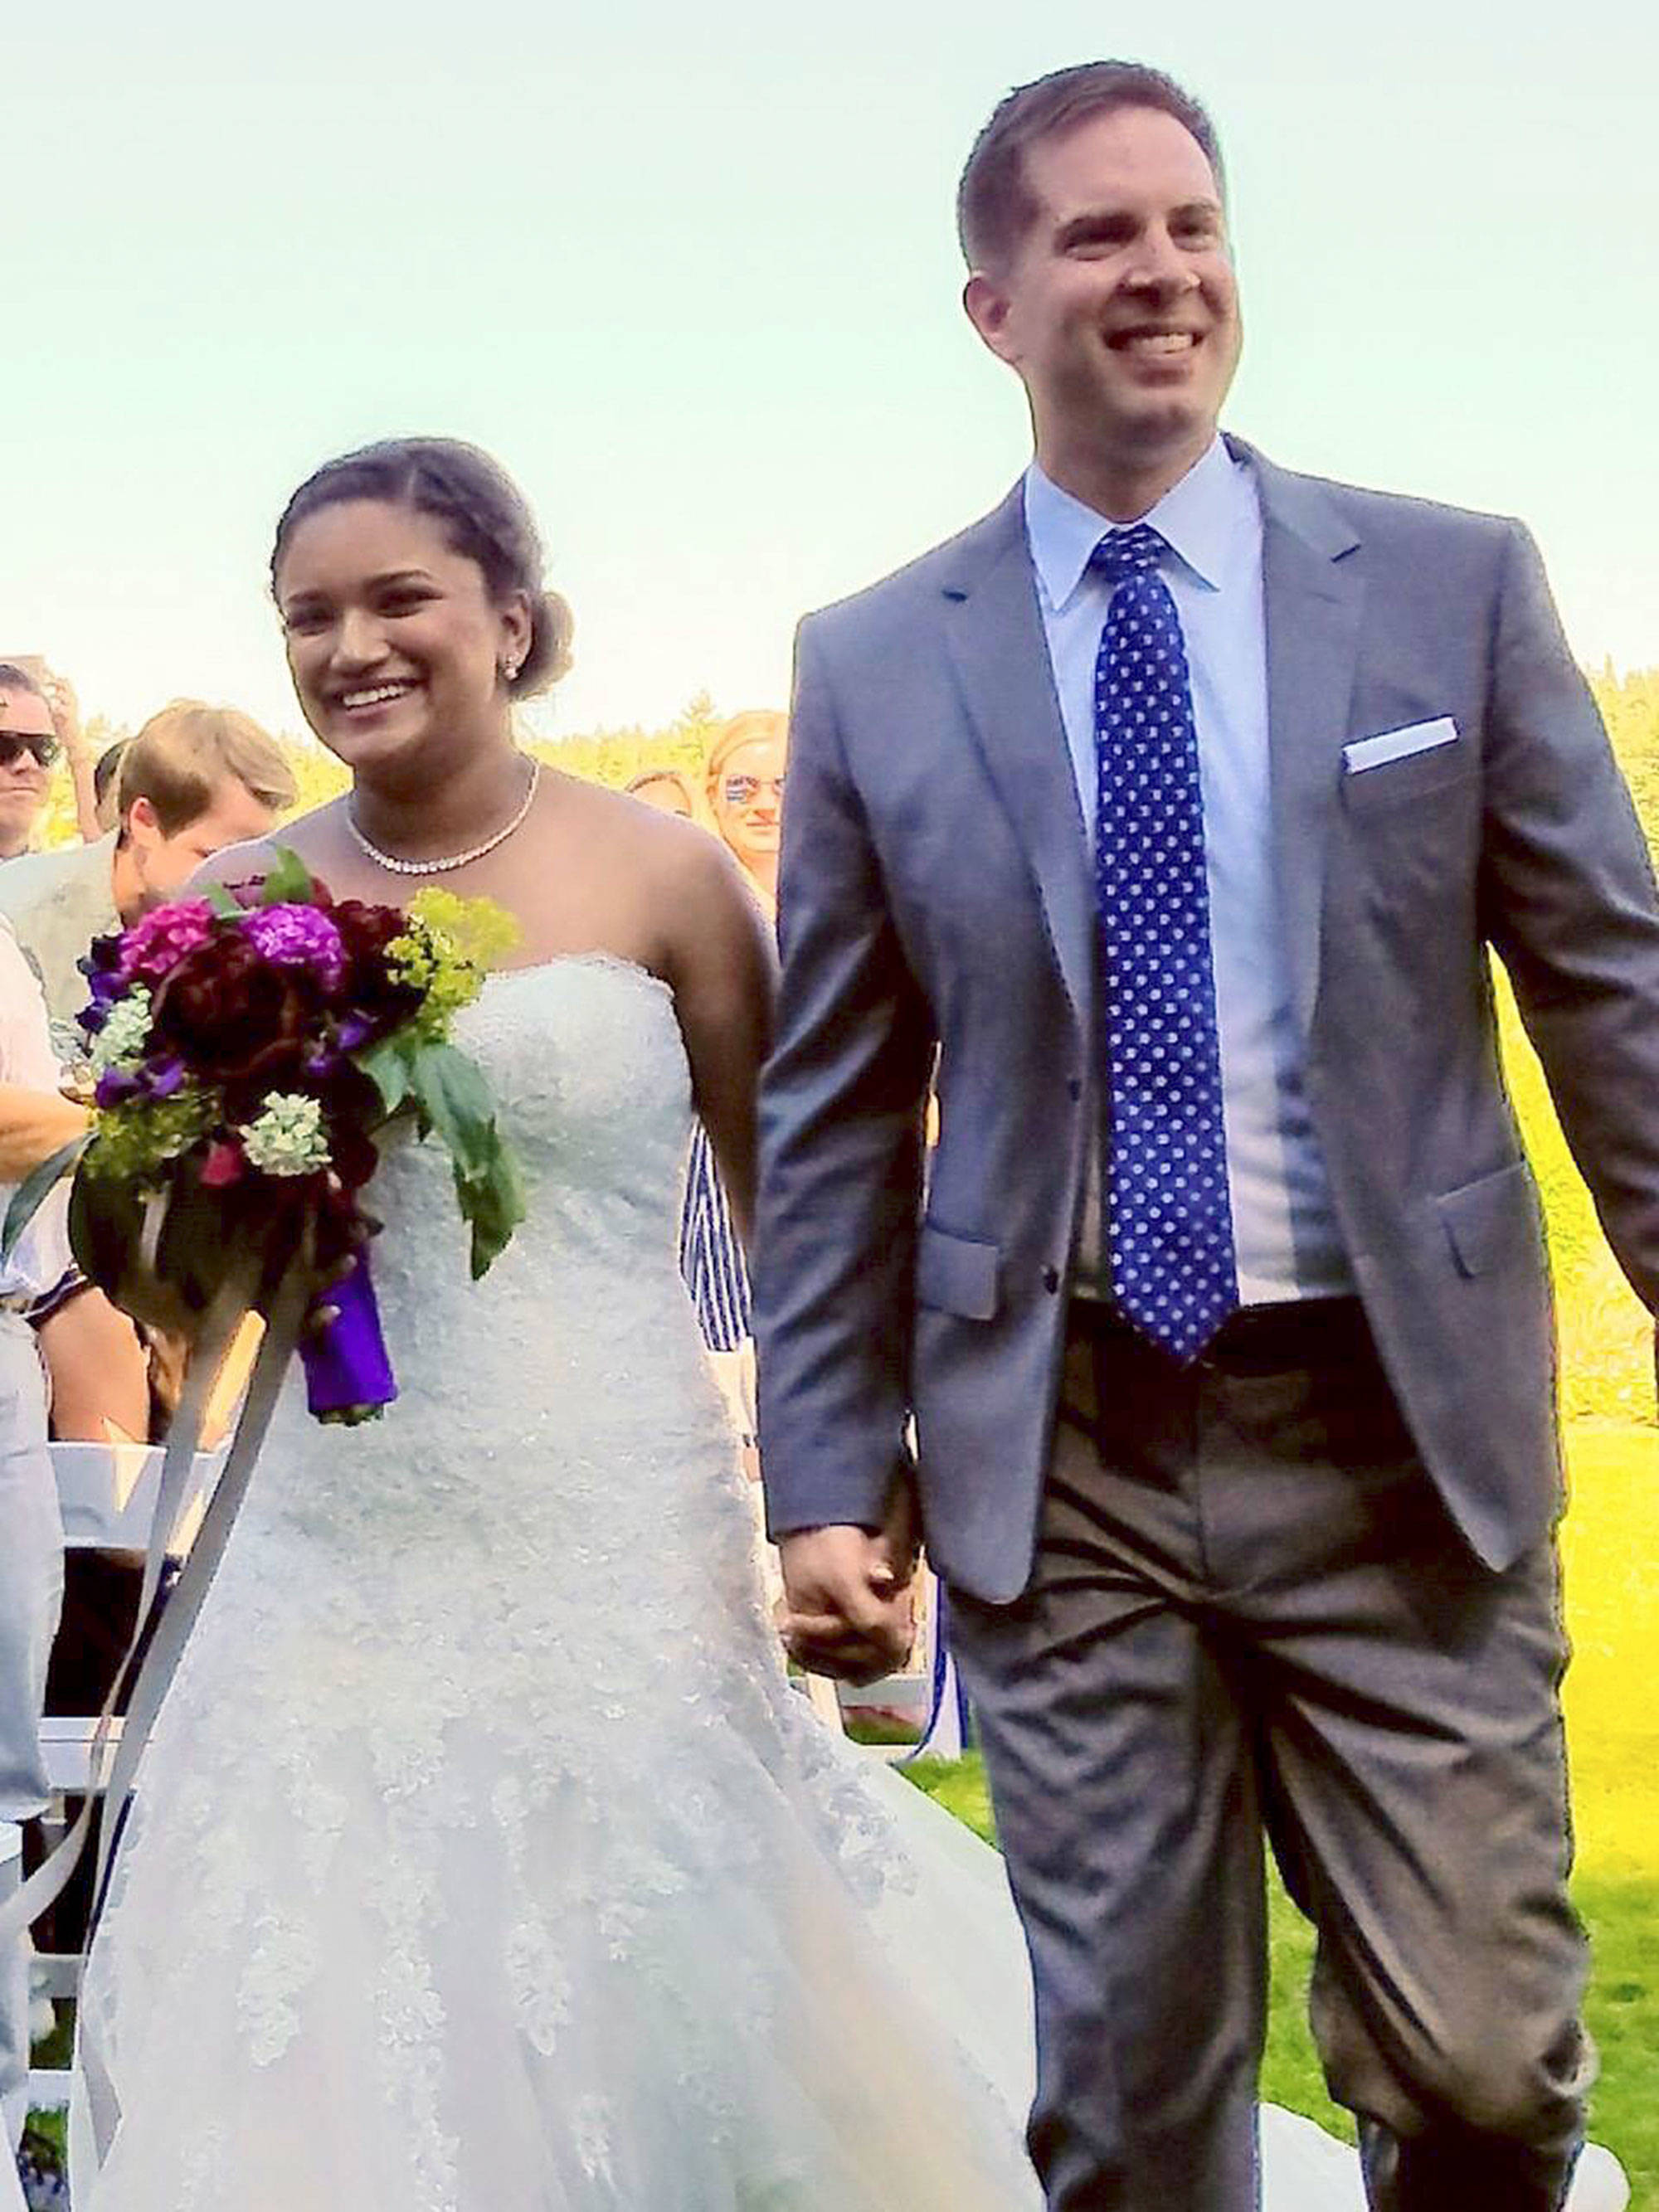 MATRIMONY | South Whidbey son marries in Langley